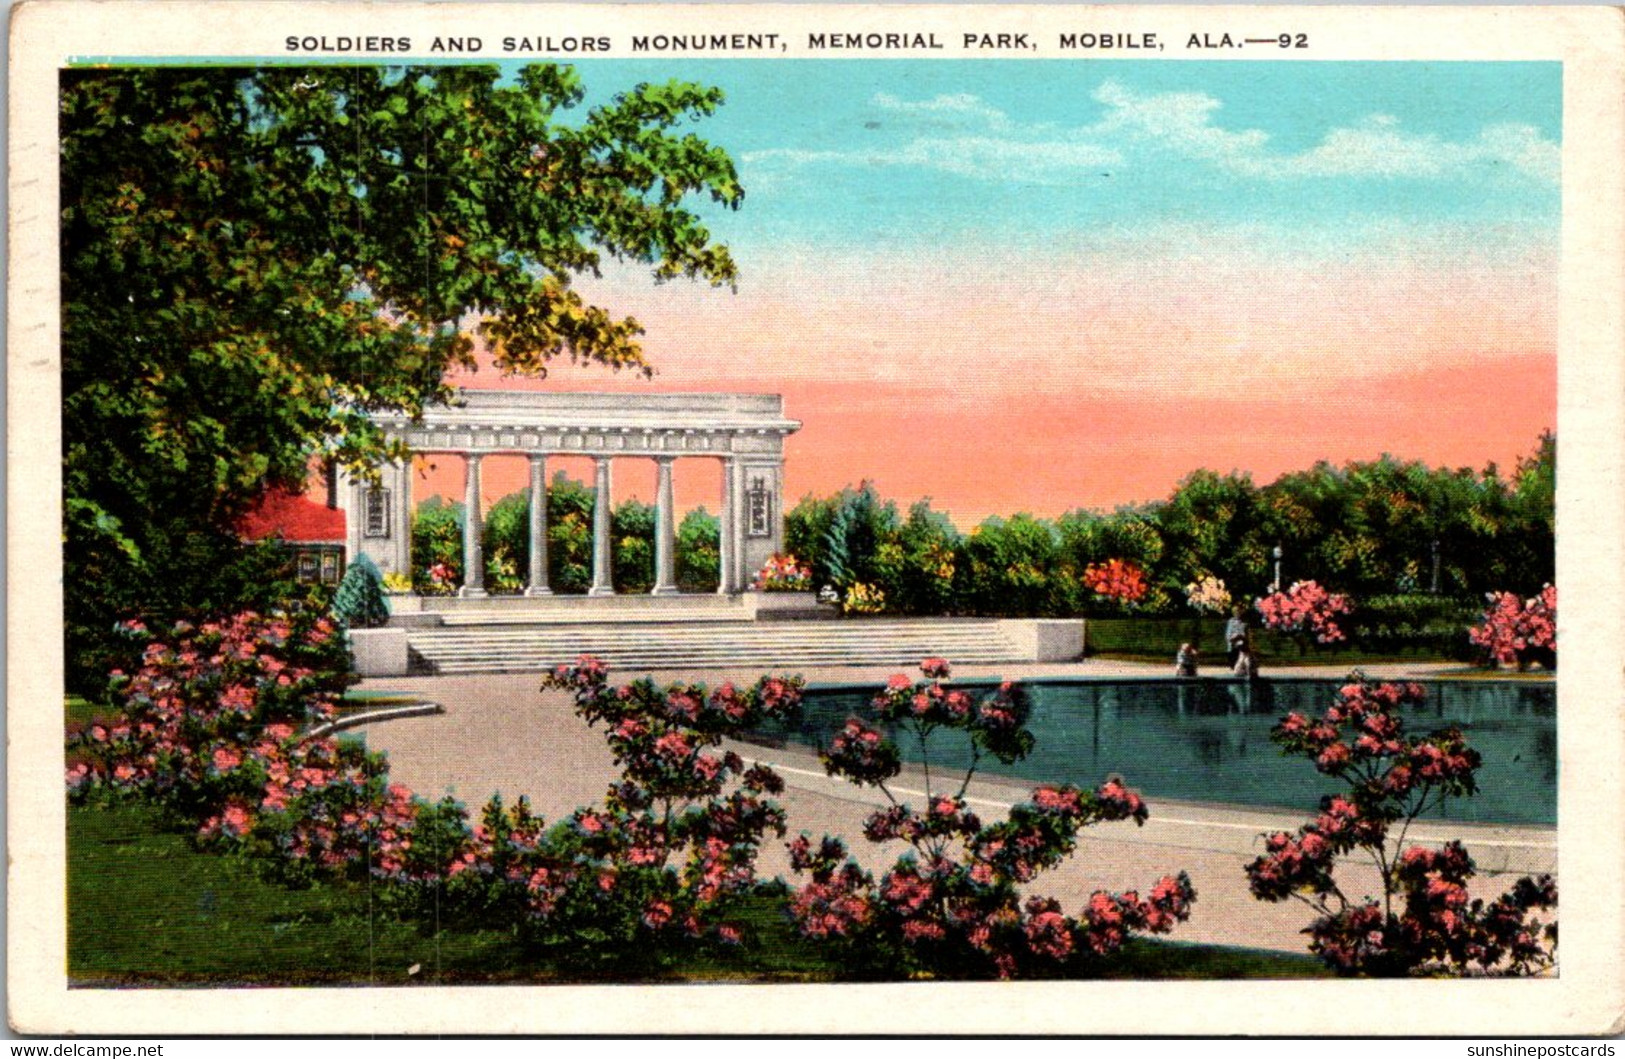 Alabama Mobile Memorial Park Soldiers And Sailors Monument 1935 - Mobile